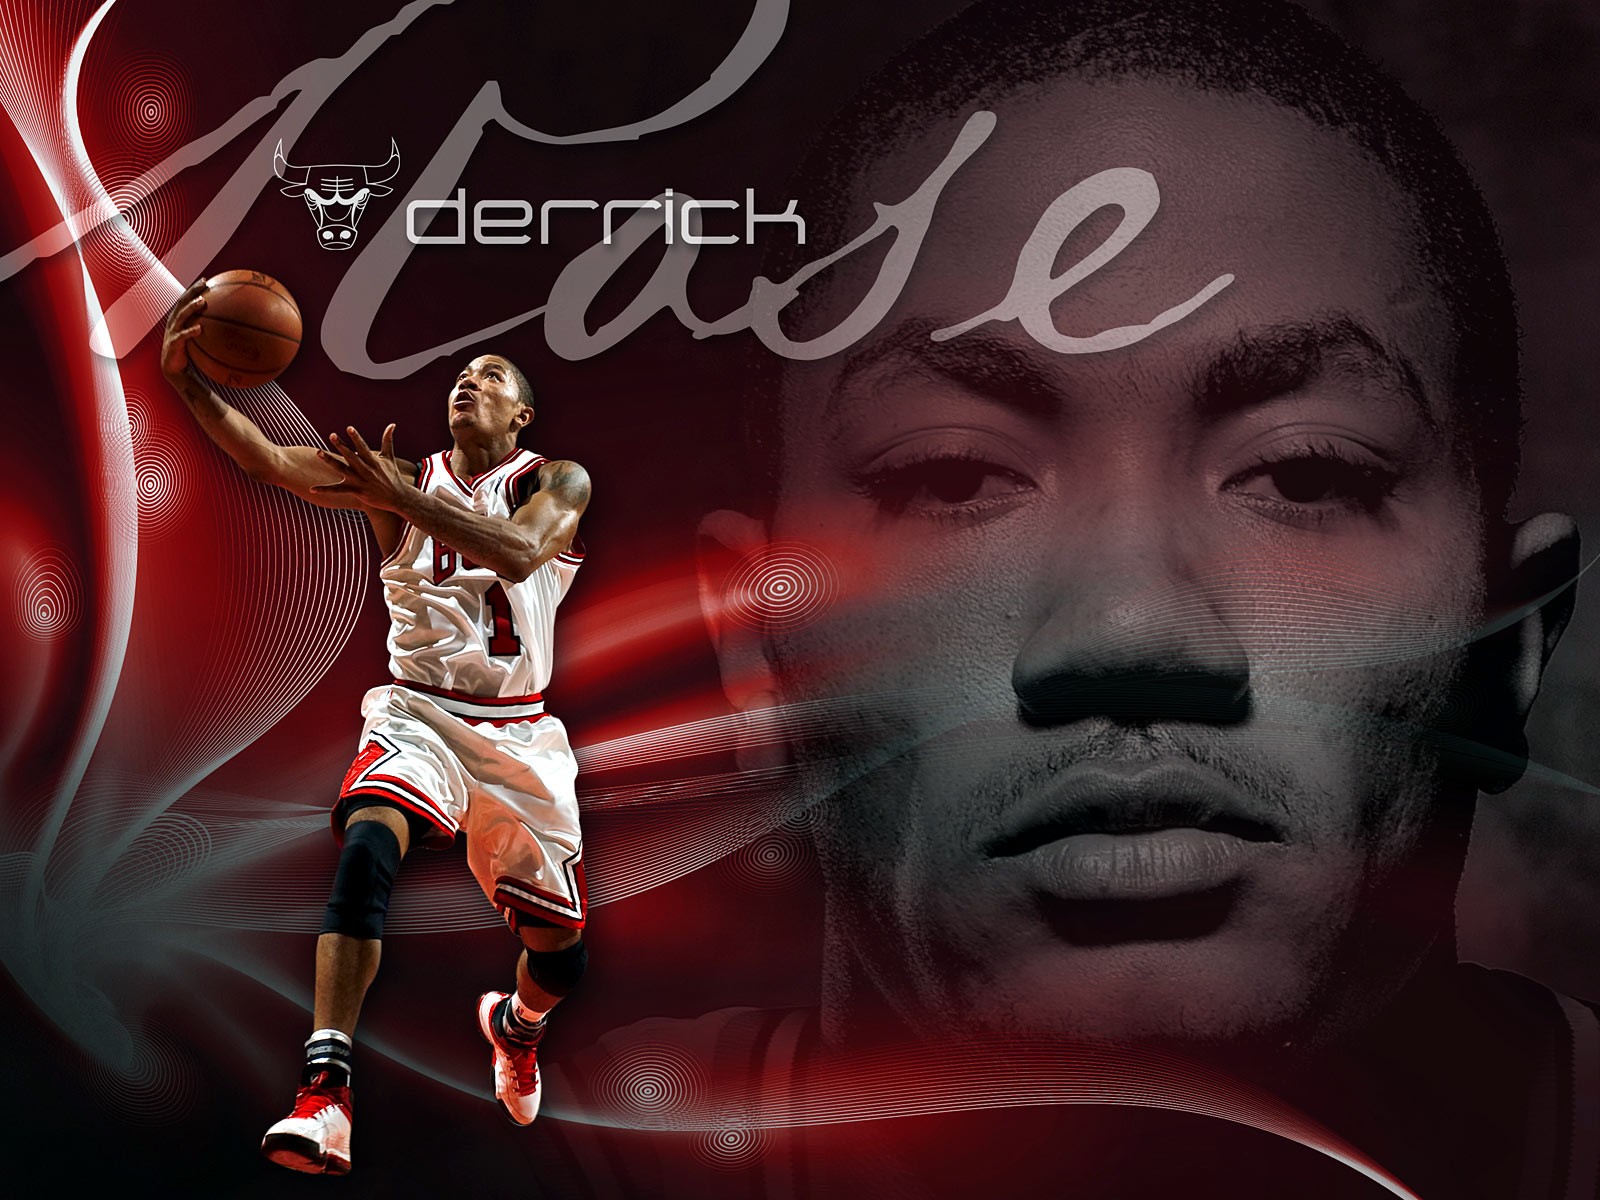 Derrick Rose HD Wallpapers Latest HD Wallpapers 1600x1200